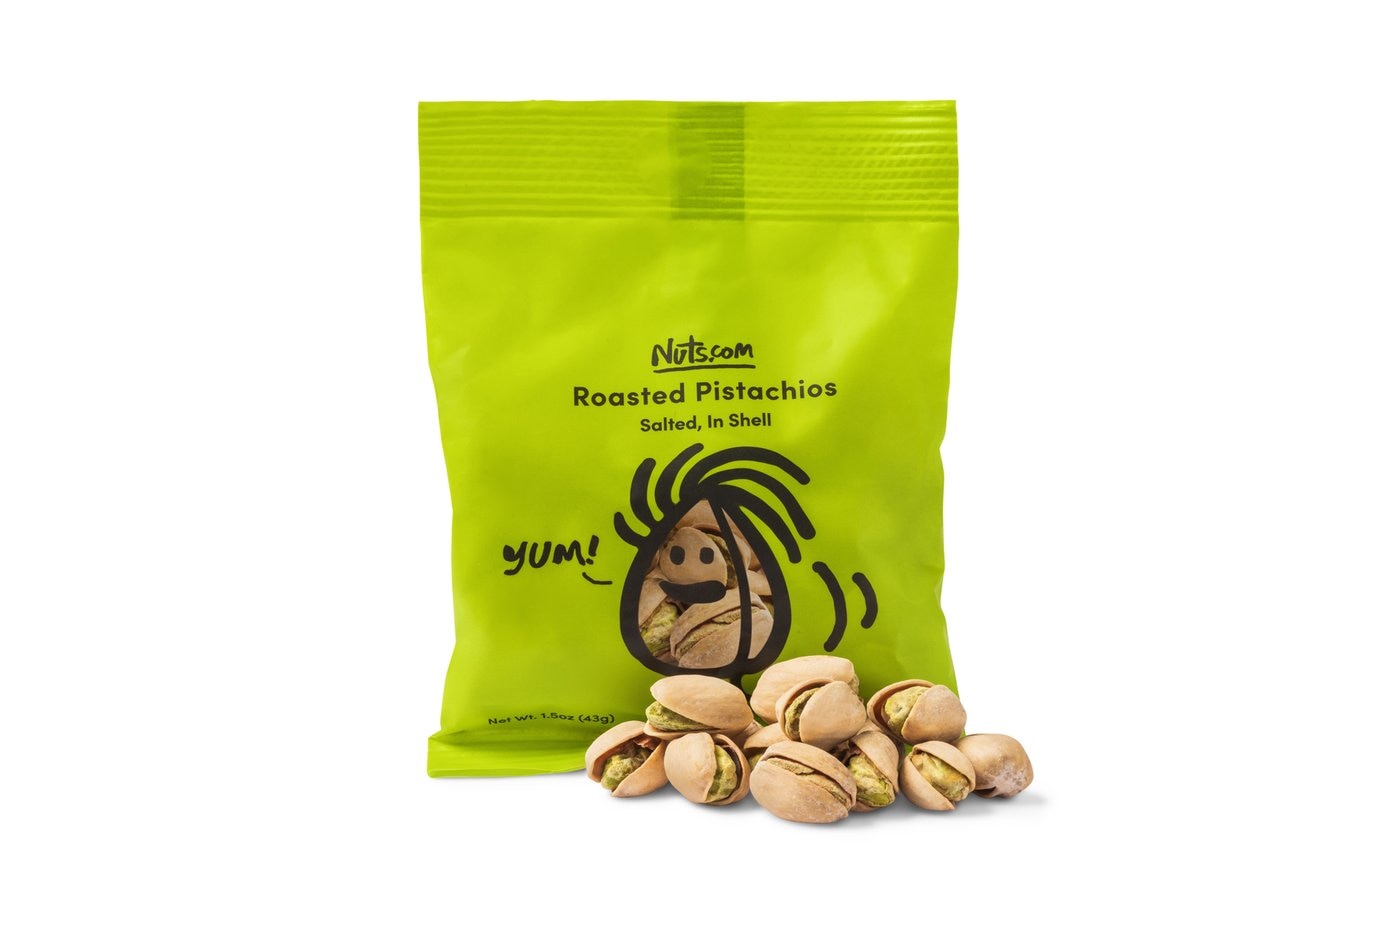 Roasted Pistachios (Salted, In Shell) - Single Serve photo